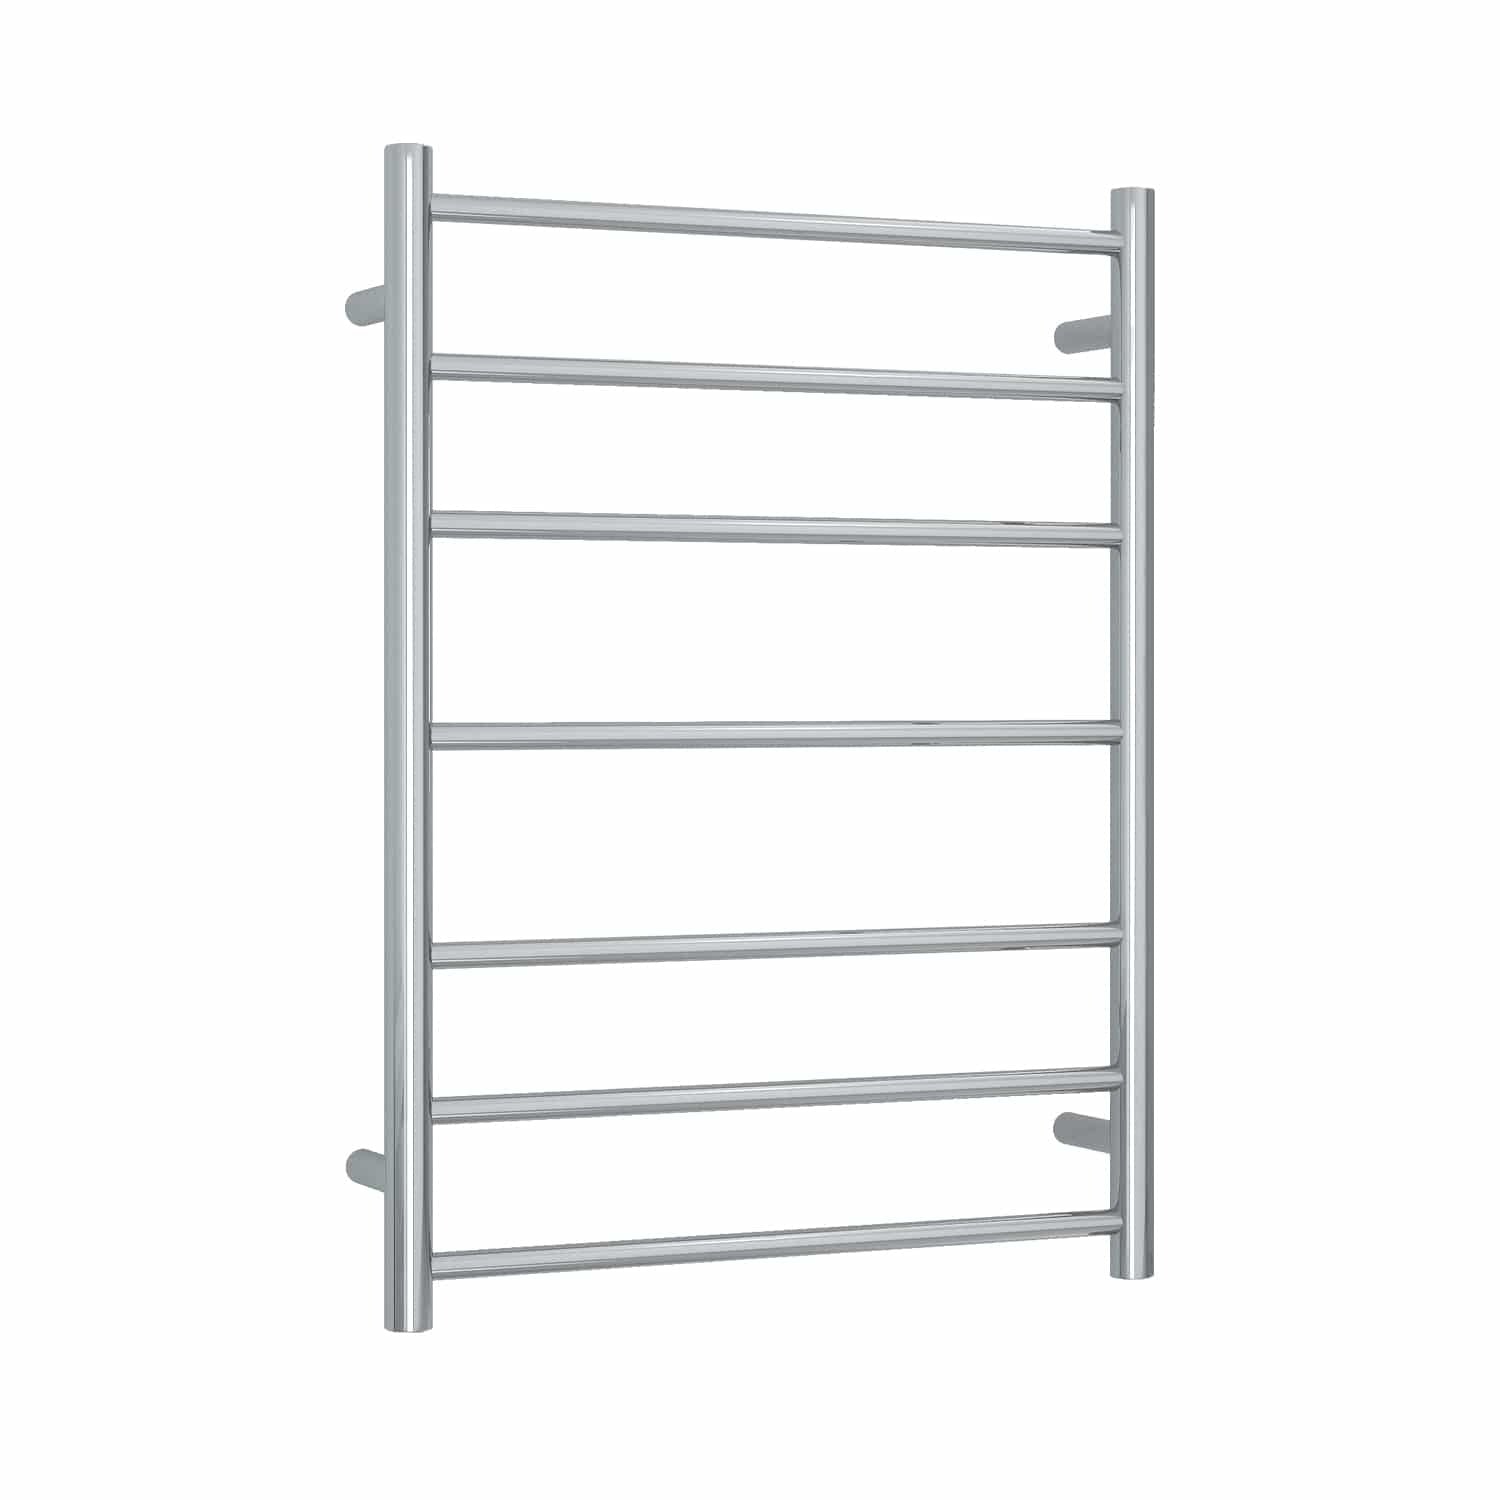 THERMOGROUP BRUSHED STAINLESS STEEL 12VOLT ROUND LADDER HEATED TOWEL RAIL 800MM